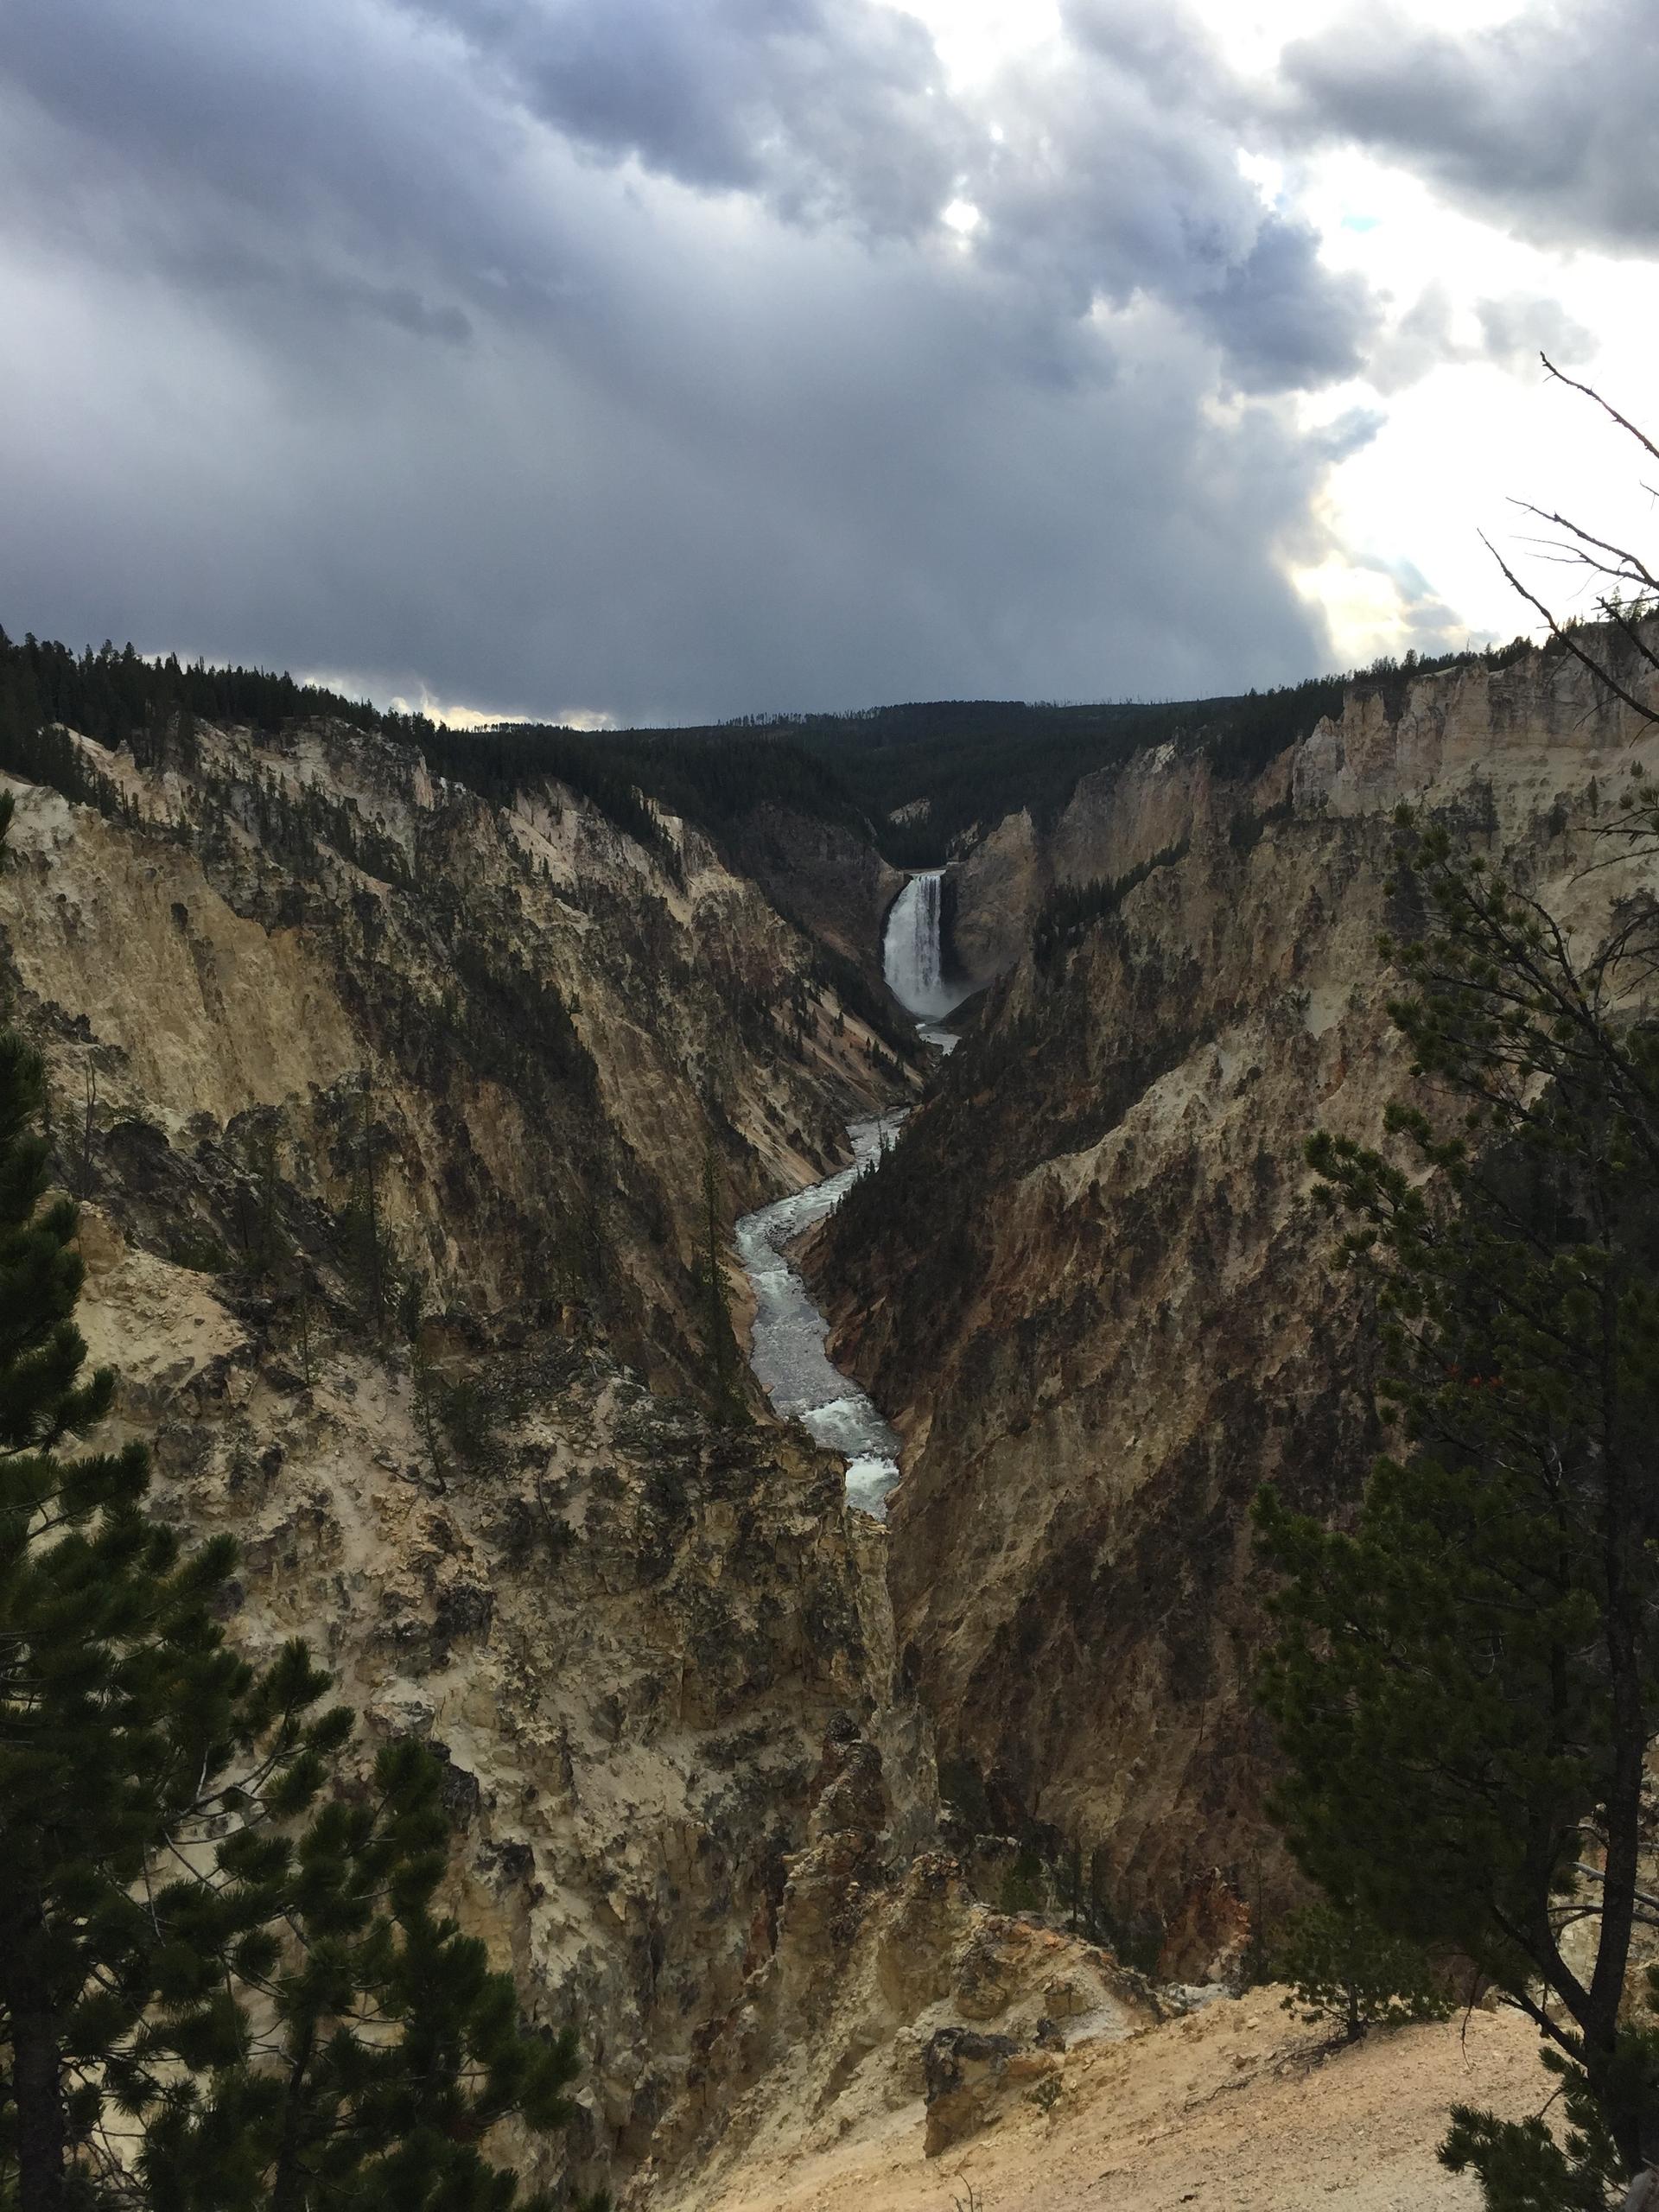 The Grand Canyon of the Yellowstone and lower falls